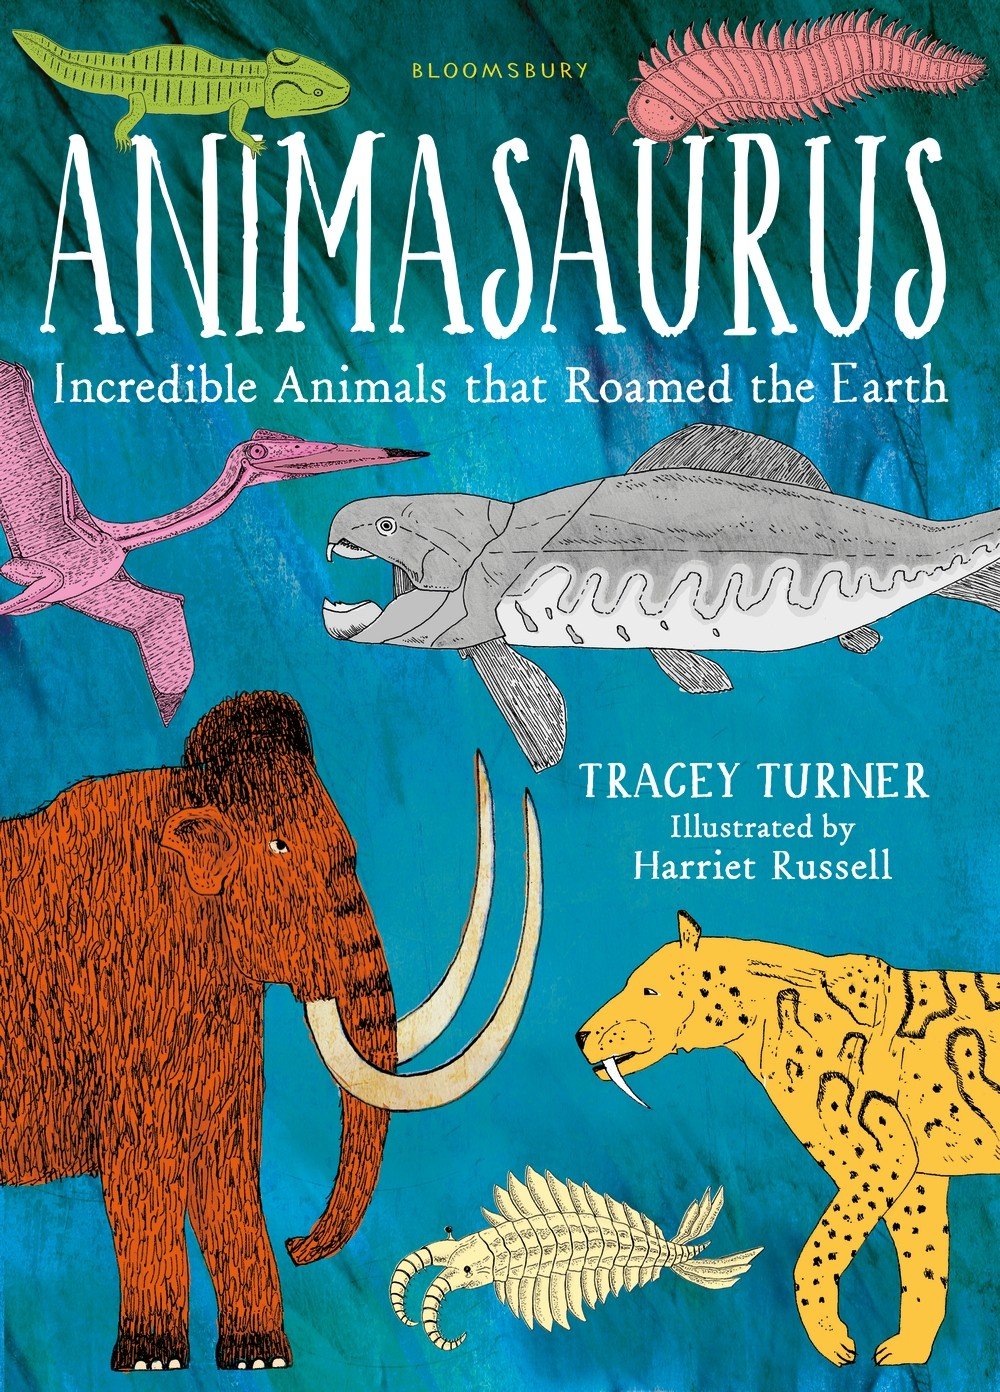 Animasaurus - Incredible Animals that Roamed the Earth | Tracey Turner